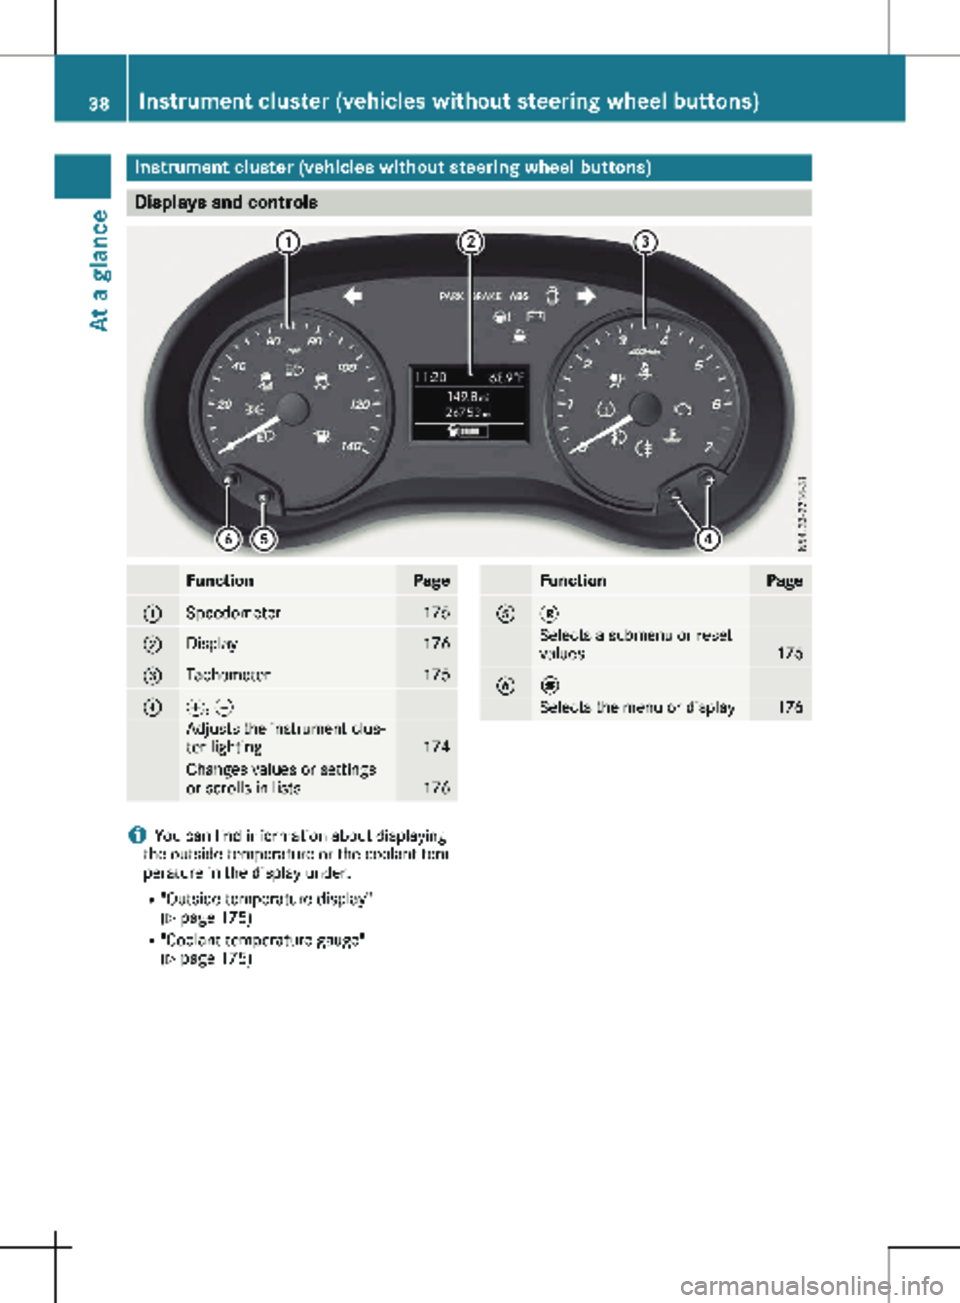 MERCEDES-BENZ METRIS 2020  MY20 Operator’s Manual Instrument cluster (vehicles without steering wheel buttons)
Displays and controls
Function Page
:
Speedometer 175
;
Display 176
=
Tachometer 175
?
f, g
Adjusts the instrument clus-
ter lighting
174
C